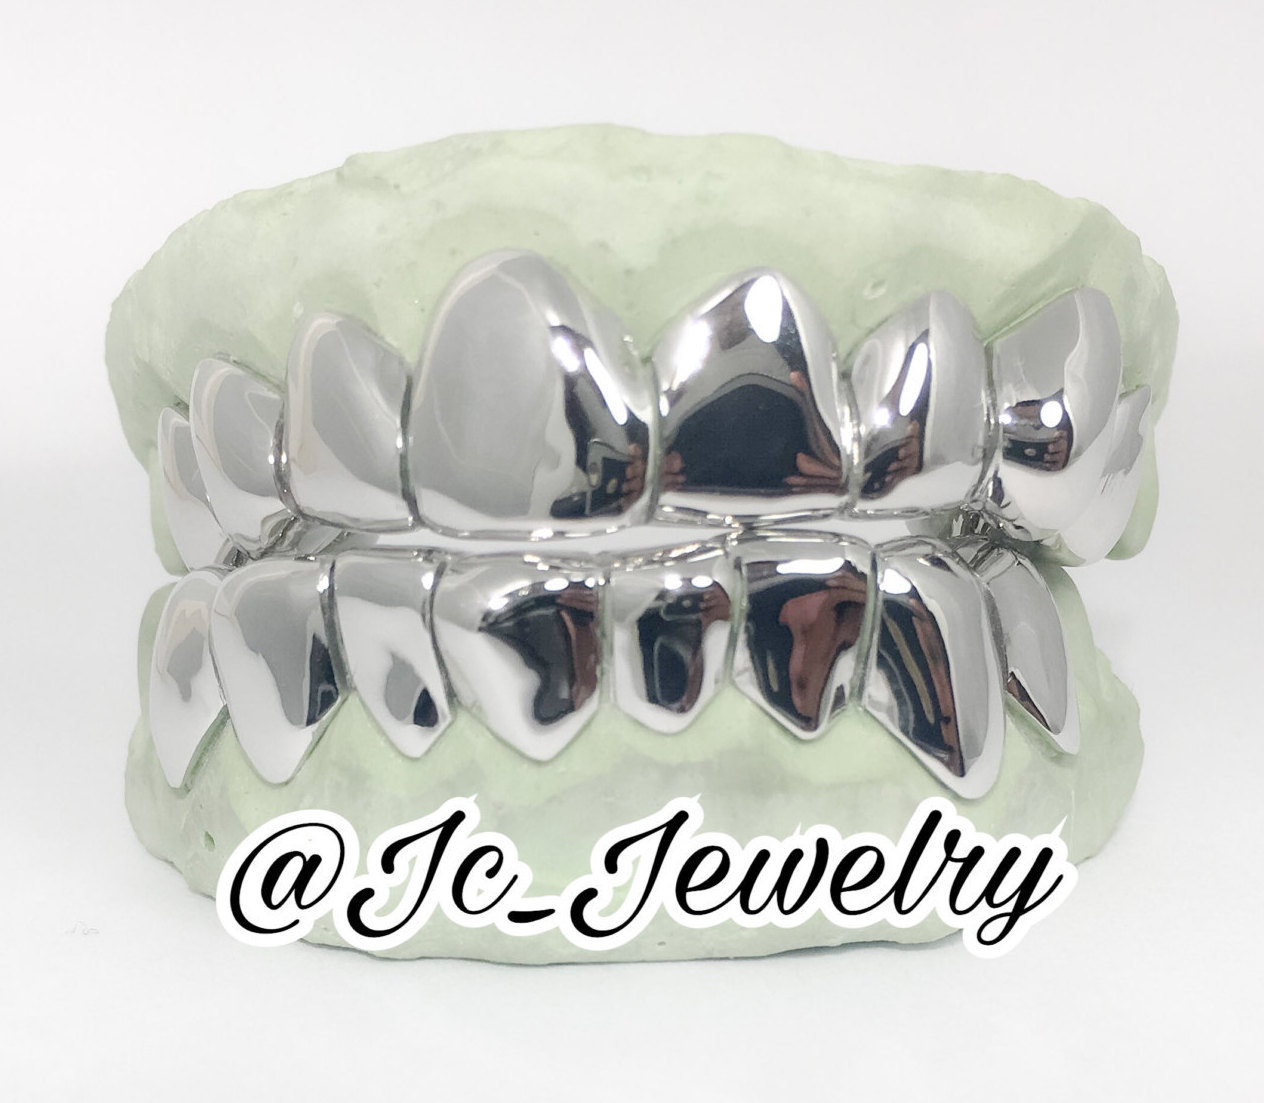 Custom 8 & 8 Bottom Piece Sterling Silver 14K Gold Grill Solid Gold Slugs Top an - $250.00